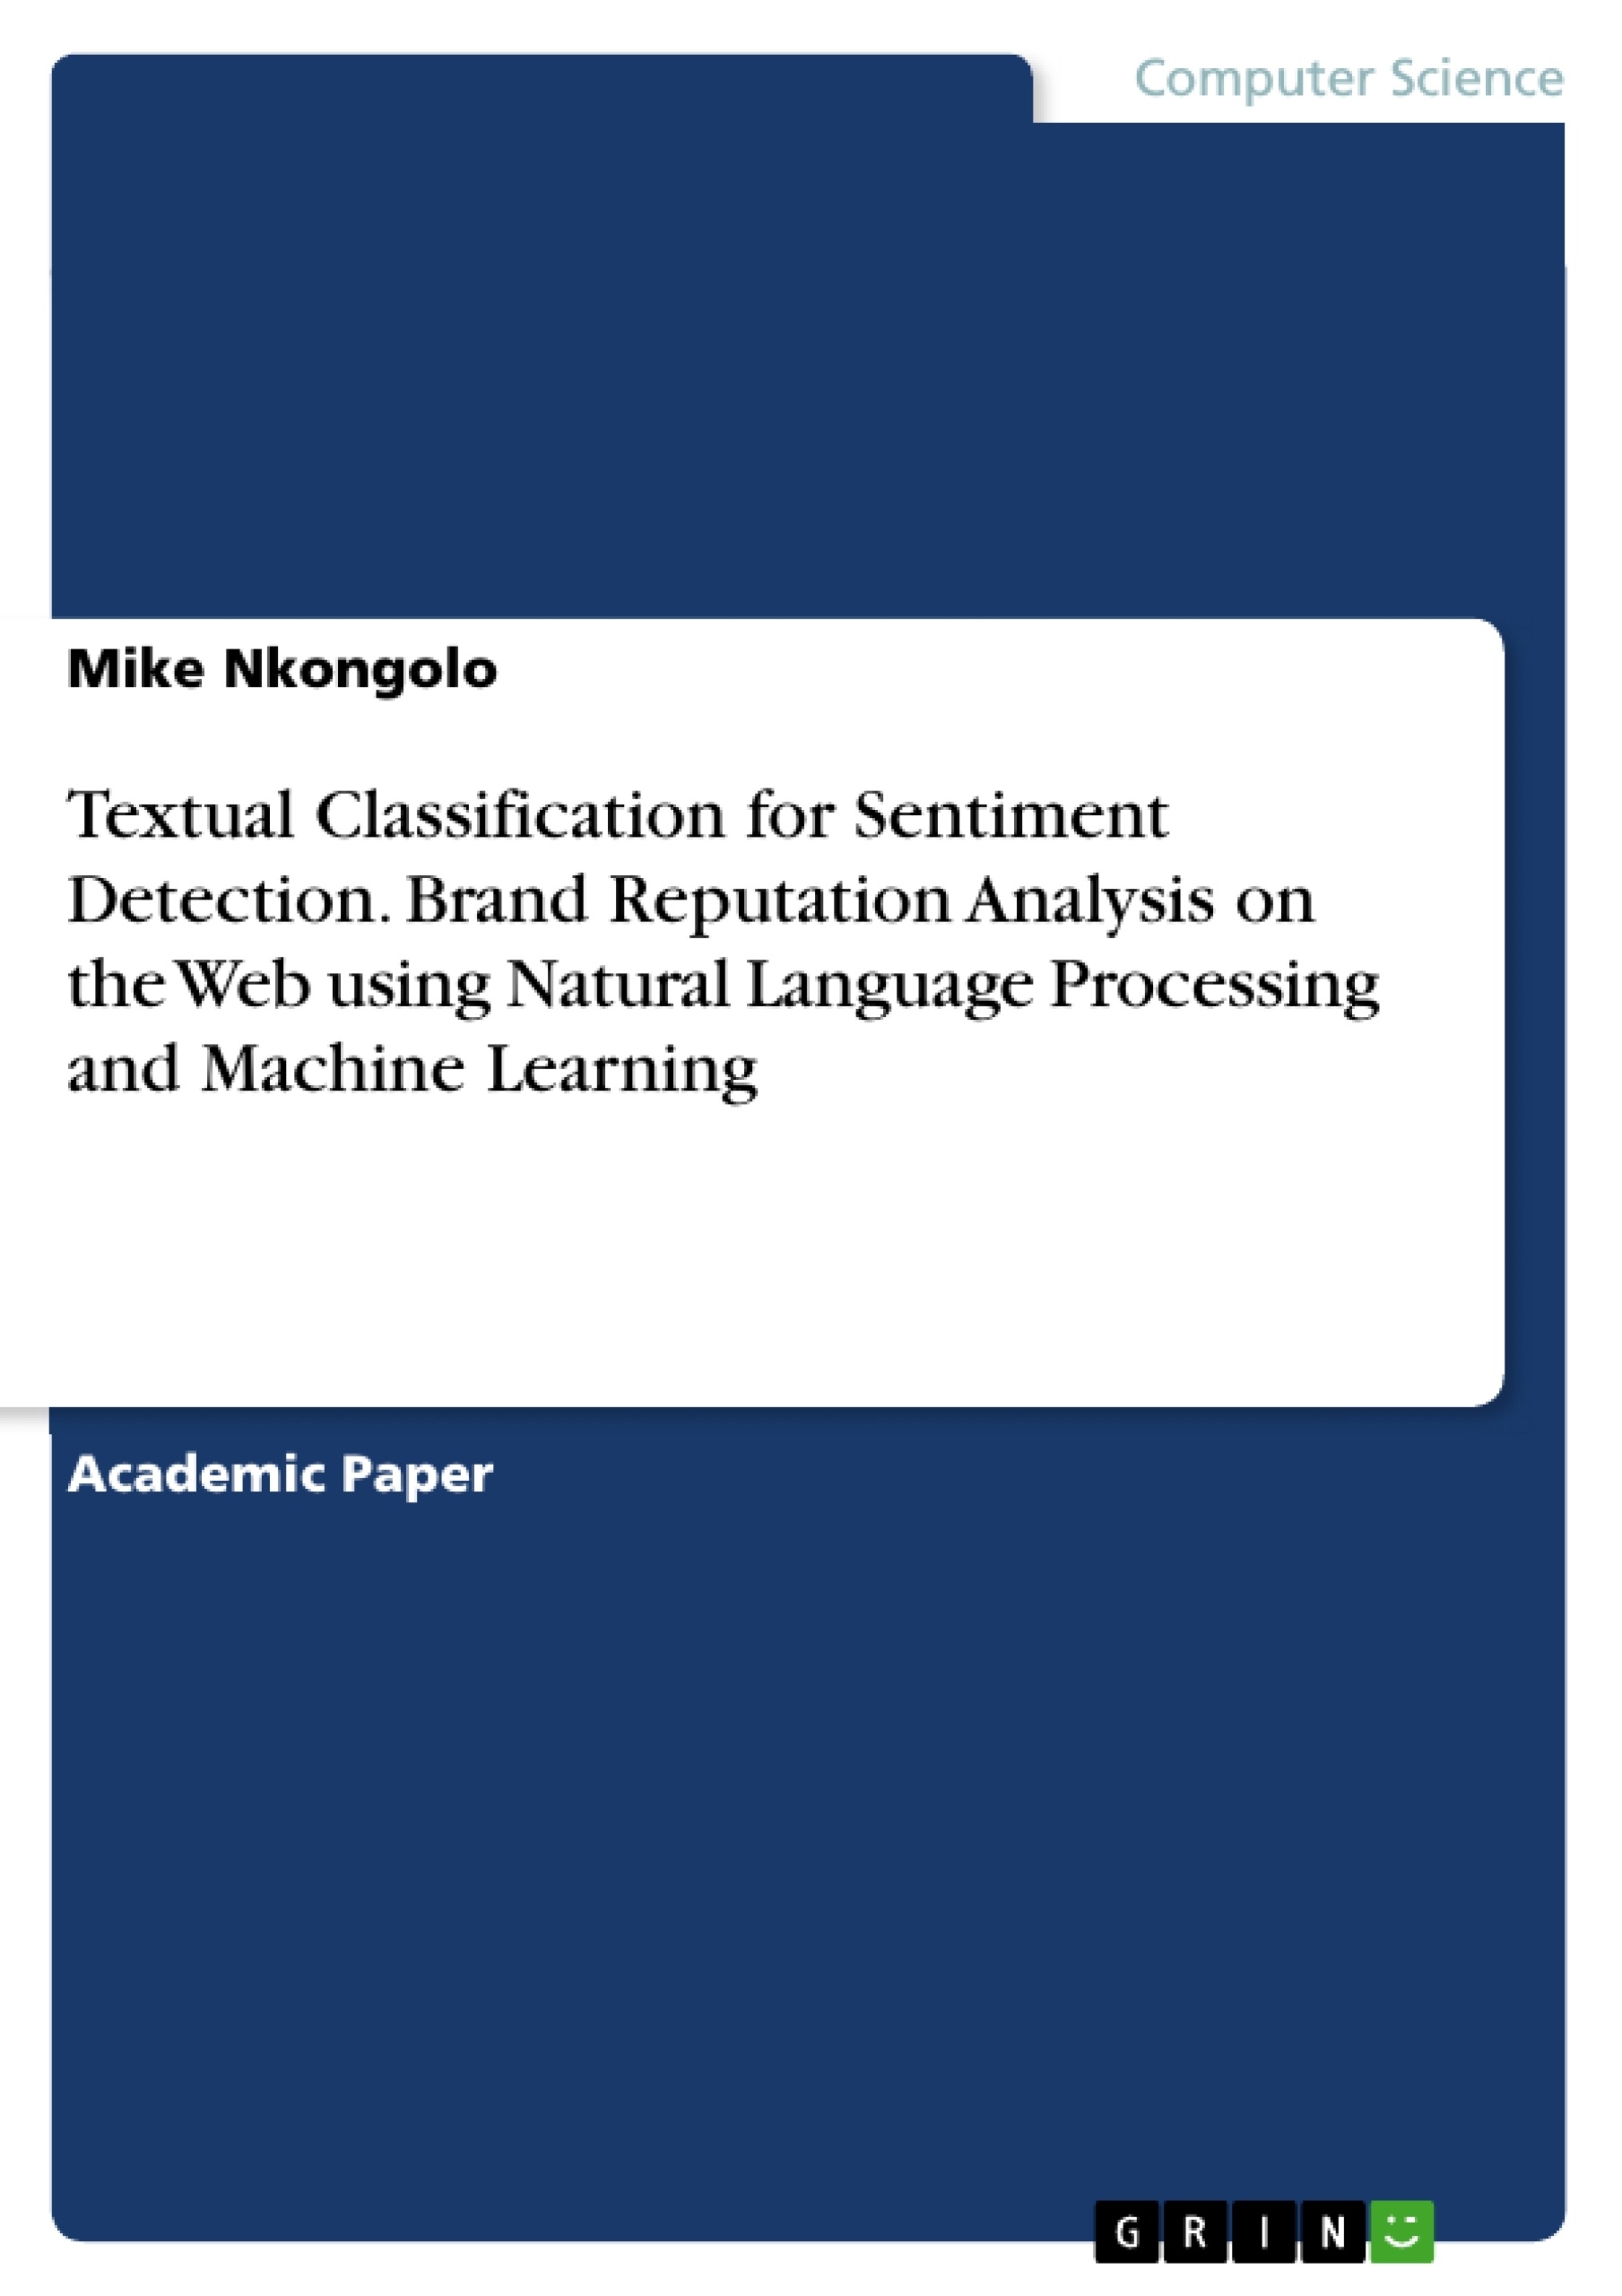 Title: Textual Classification for Sentiment Detection. Brand Reputation Analysis on the Web using Natural Language Processing and Machine Learning